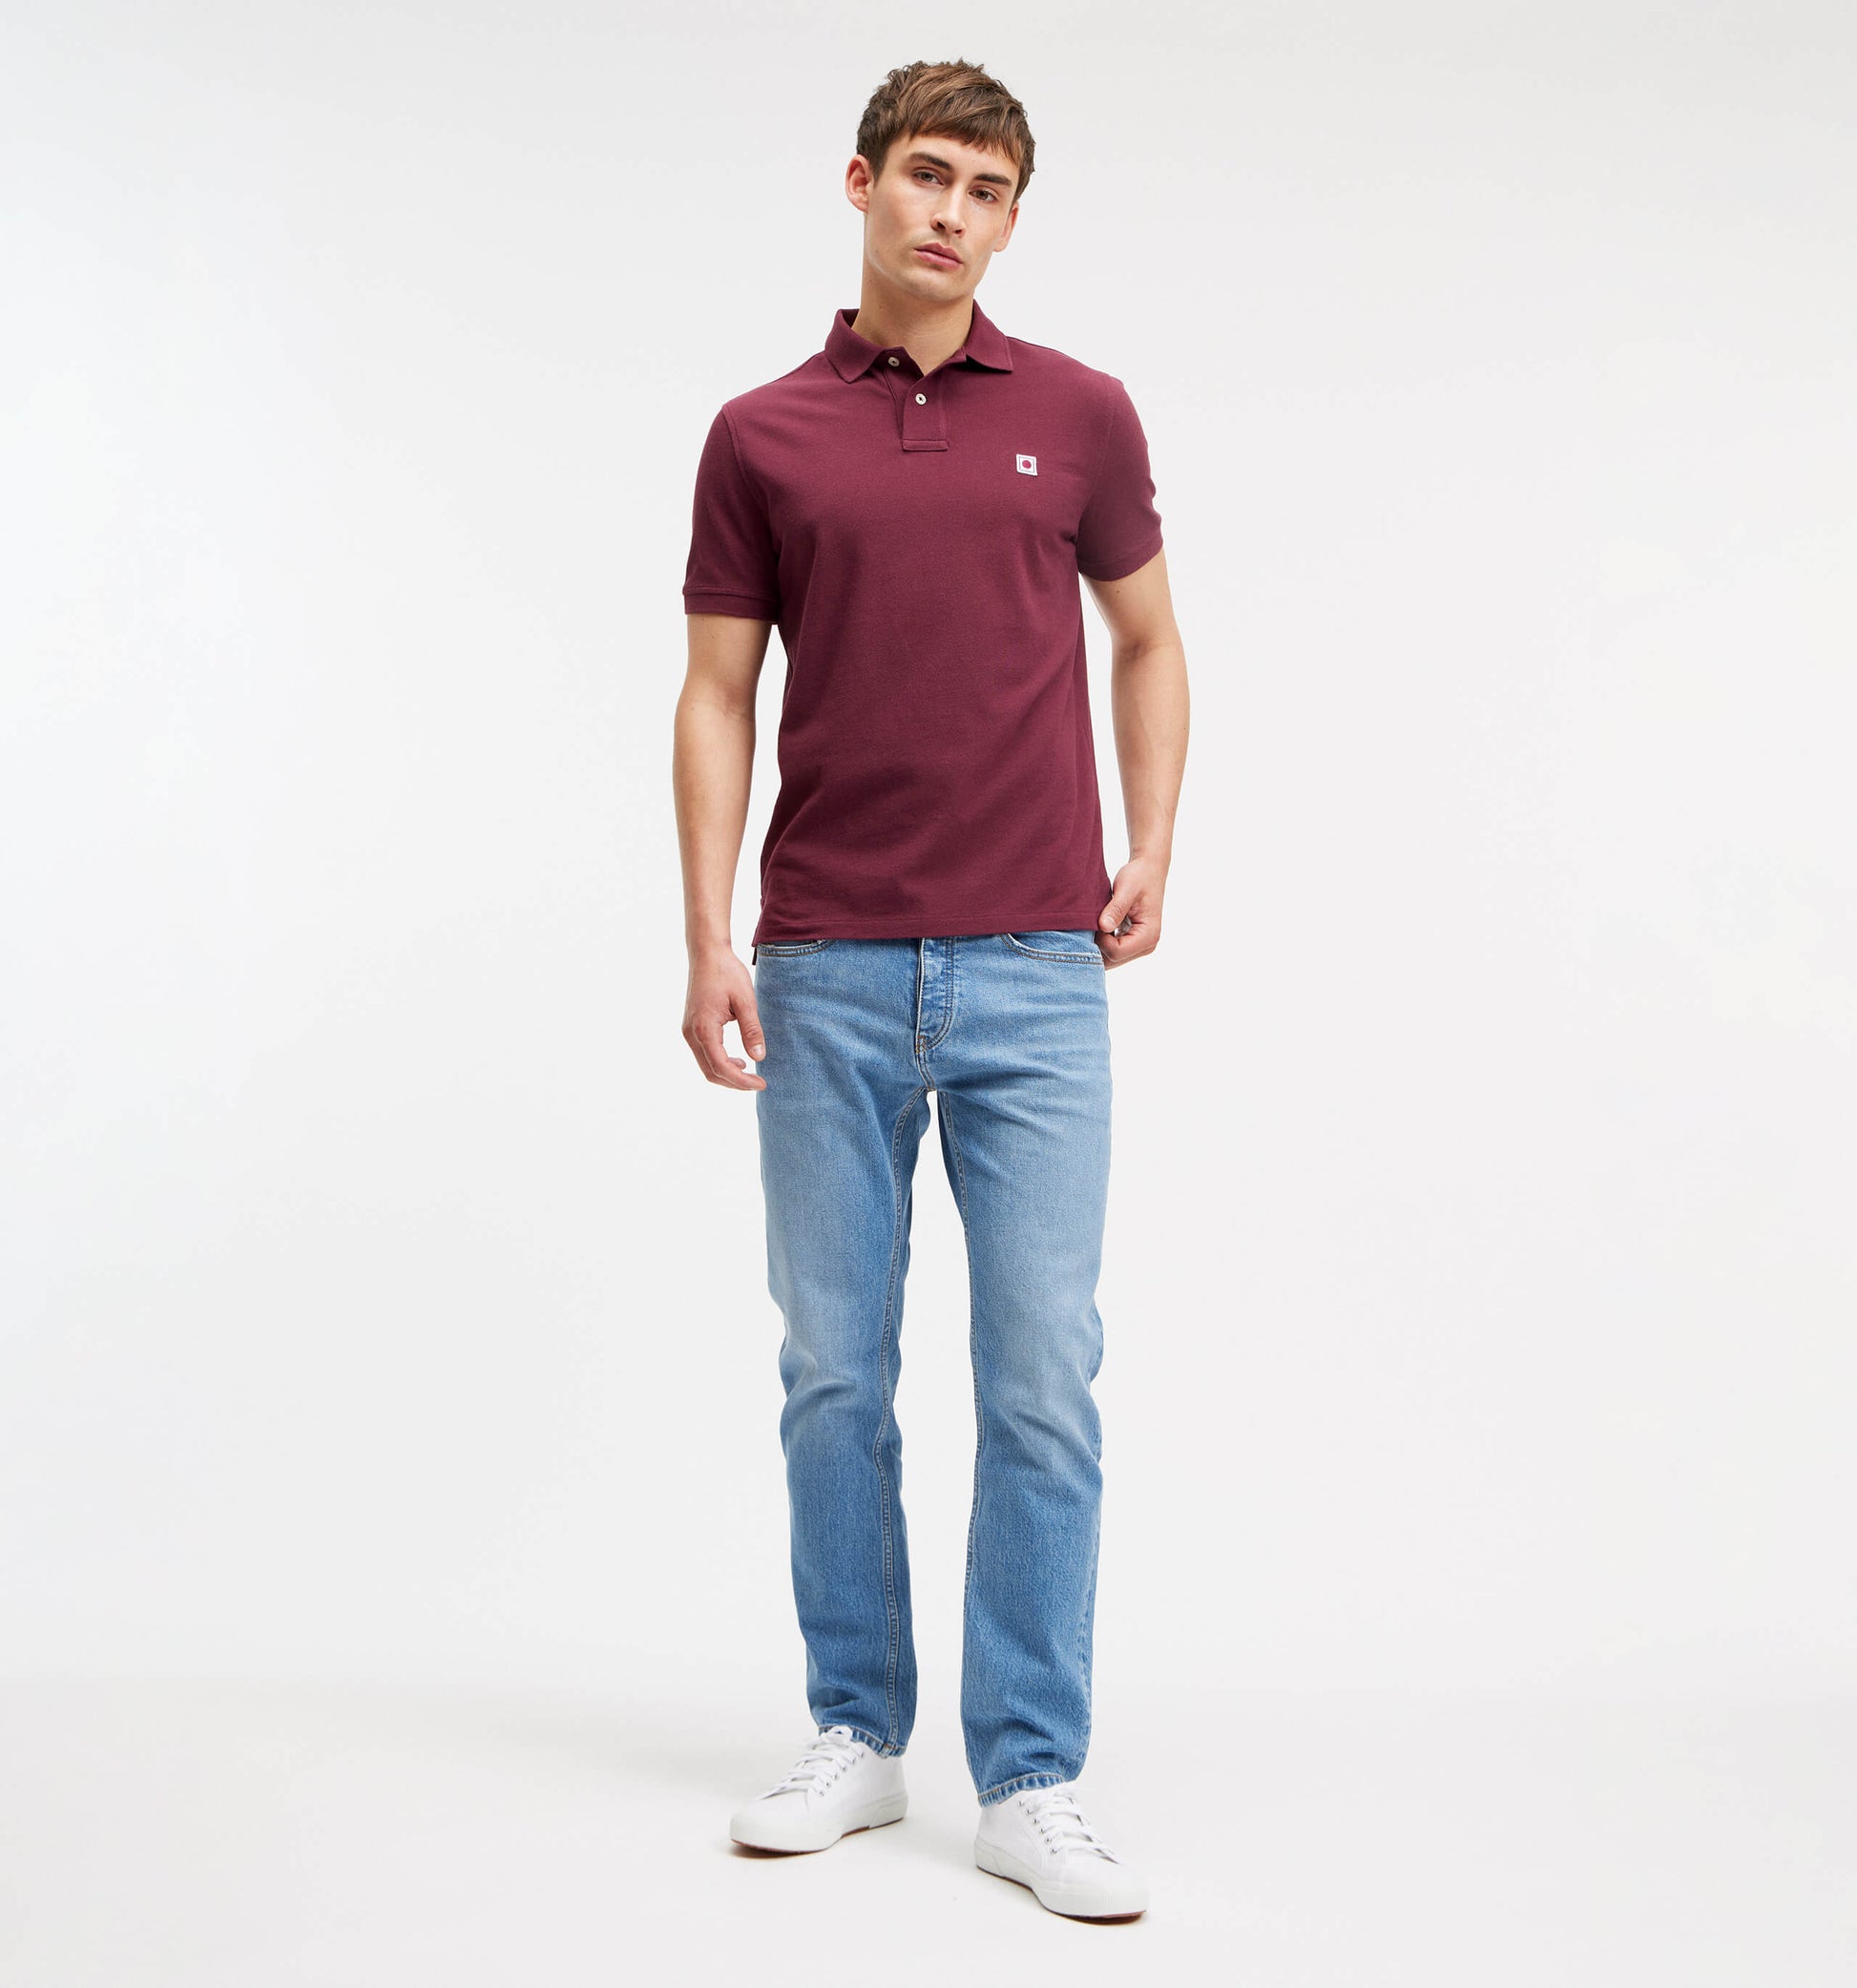 The Rene - Pique Polo In Burgundy From King Essentials